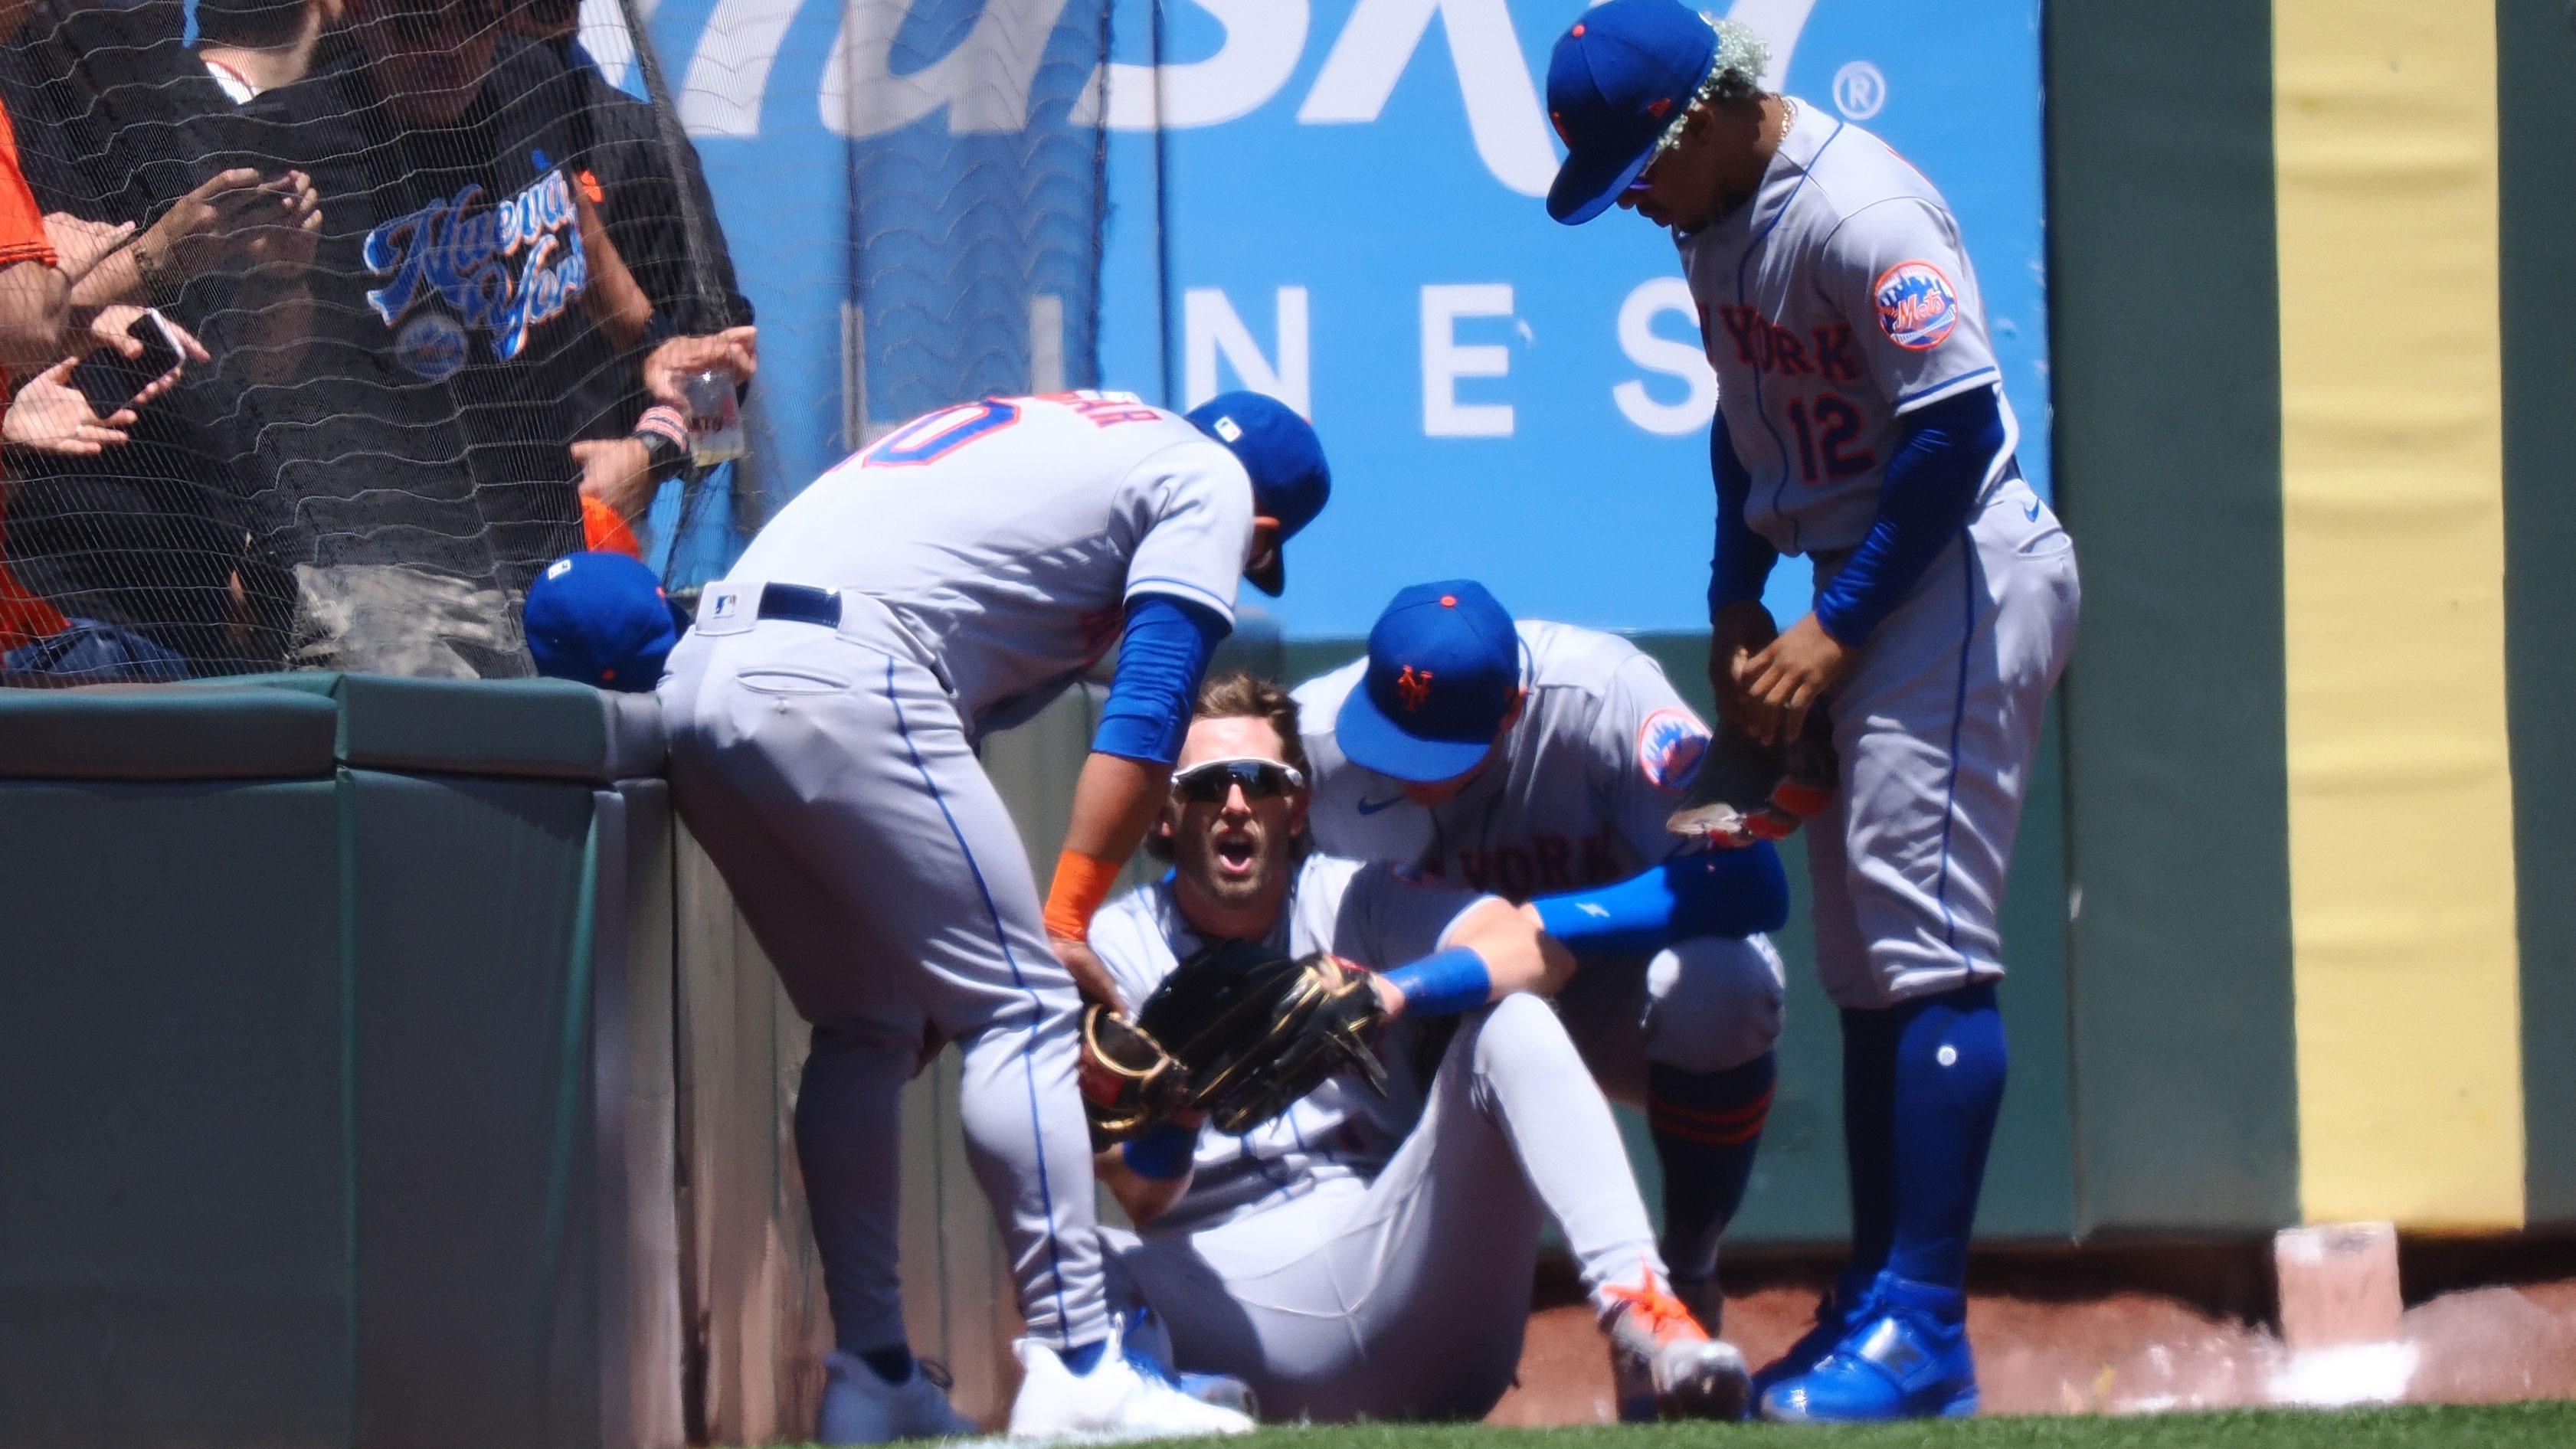 May 25, 2022; San Francisco, California, USA; Teammates check on New York Mets left fielder Jeff McNeil (1) after colliding with the wall during the third inning against the San Francisco Giants at Oracle Park. / Kelley L Cox-USA TODAY Sports